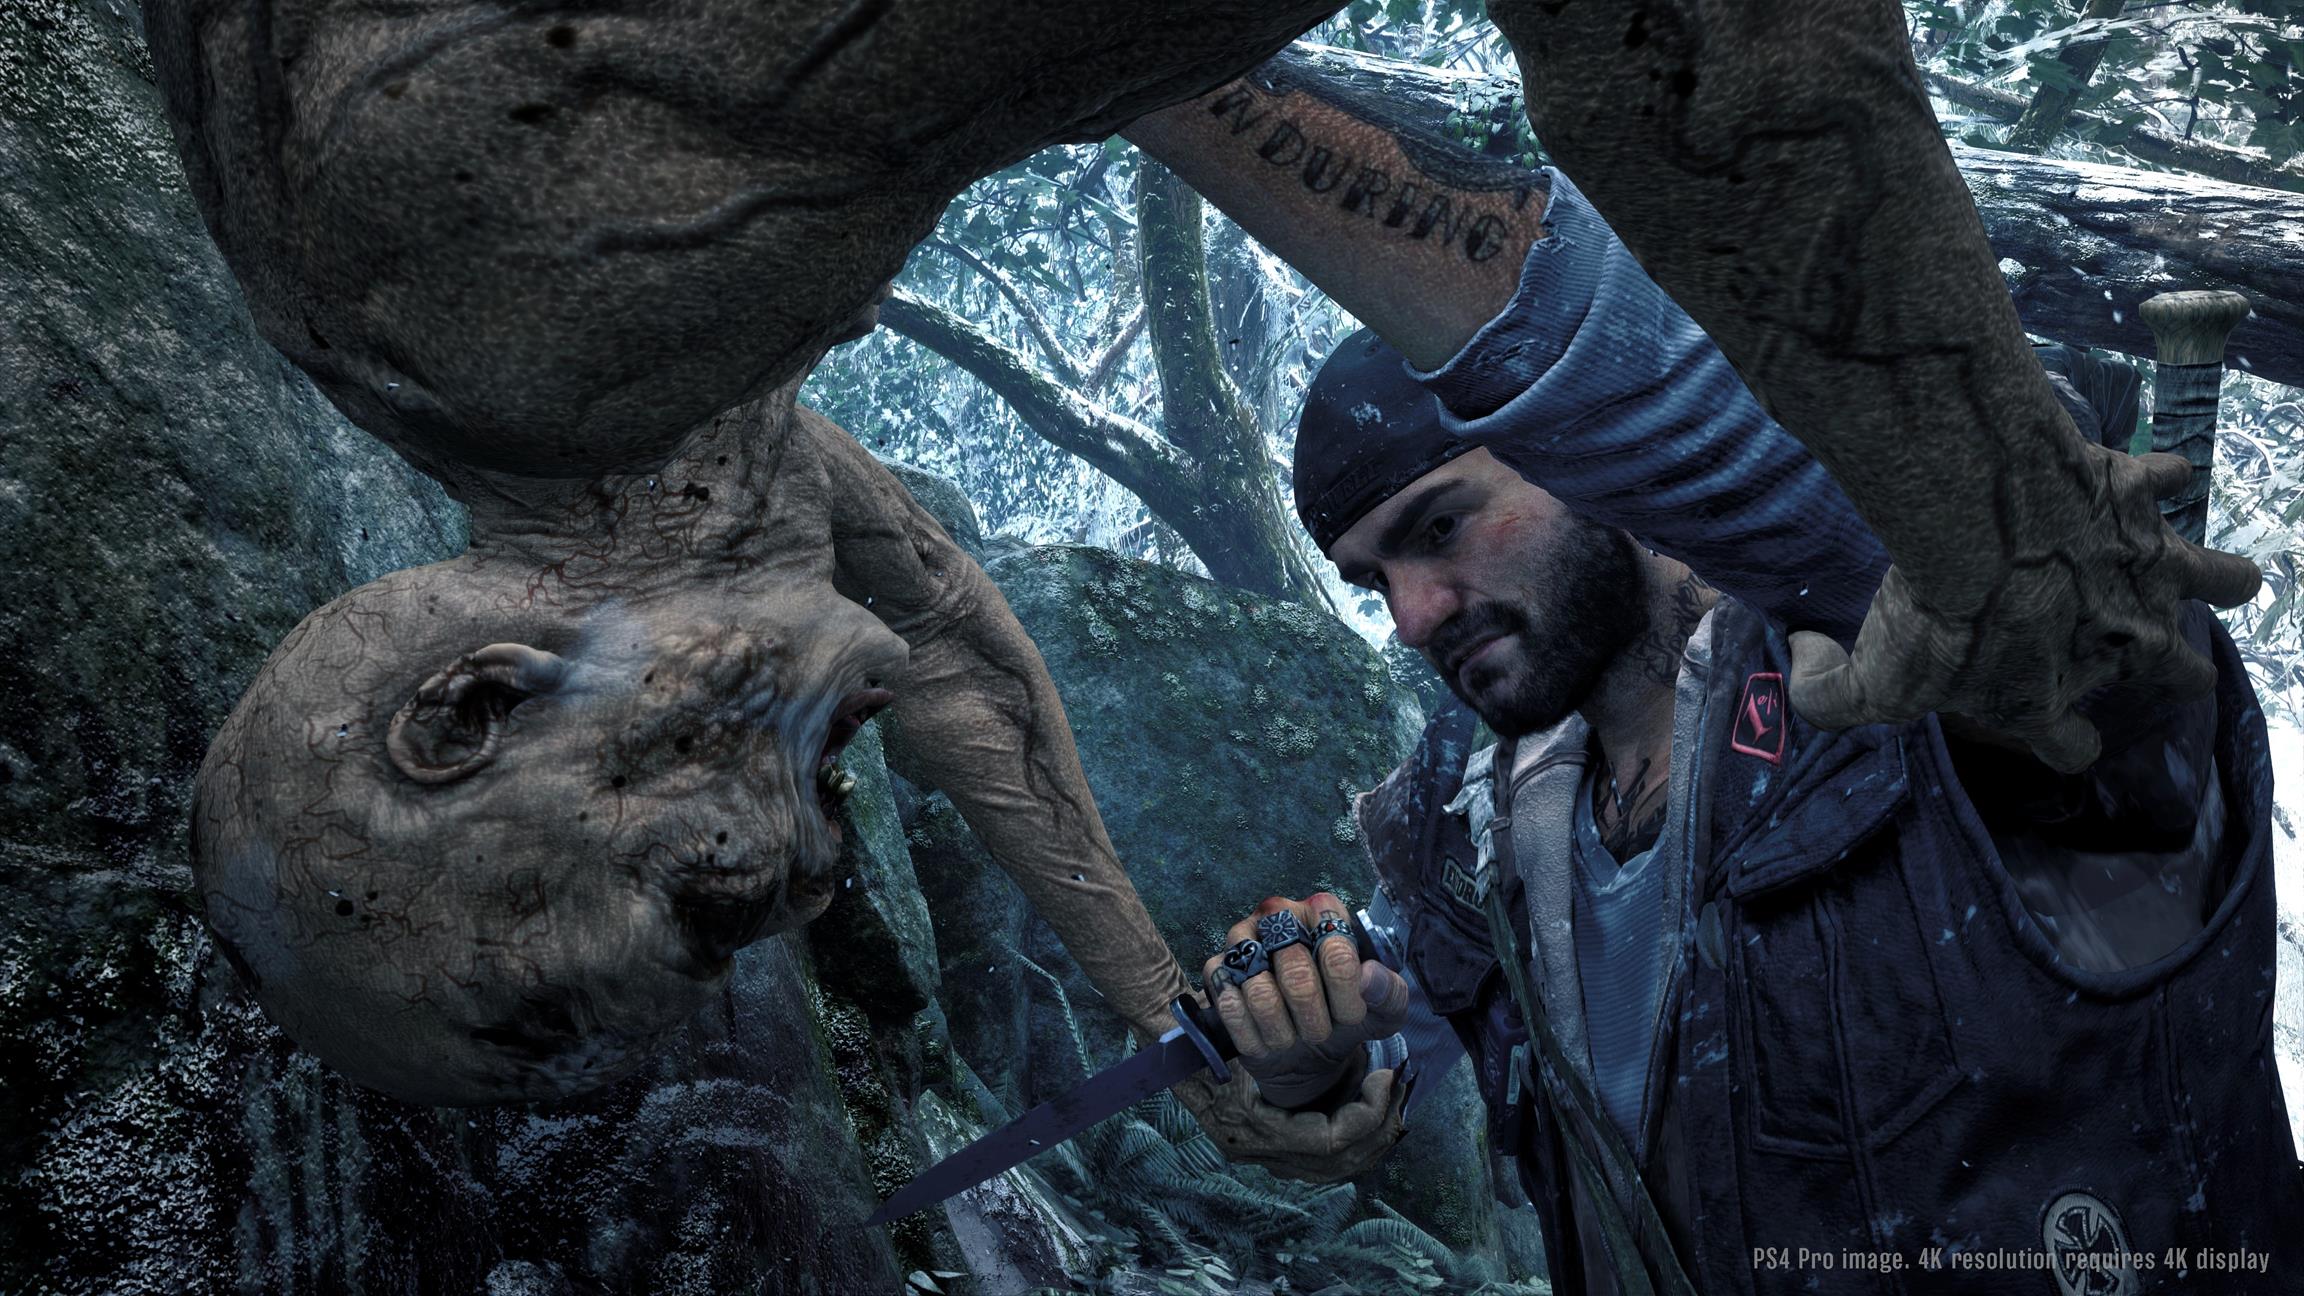 Image for Days Gone delayed to April, Concrete Genie coming in spring 2019